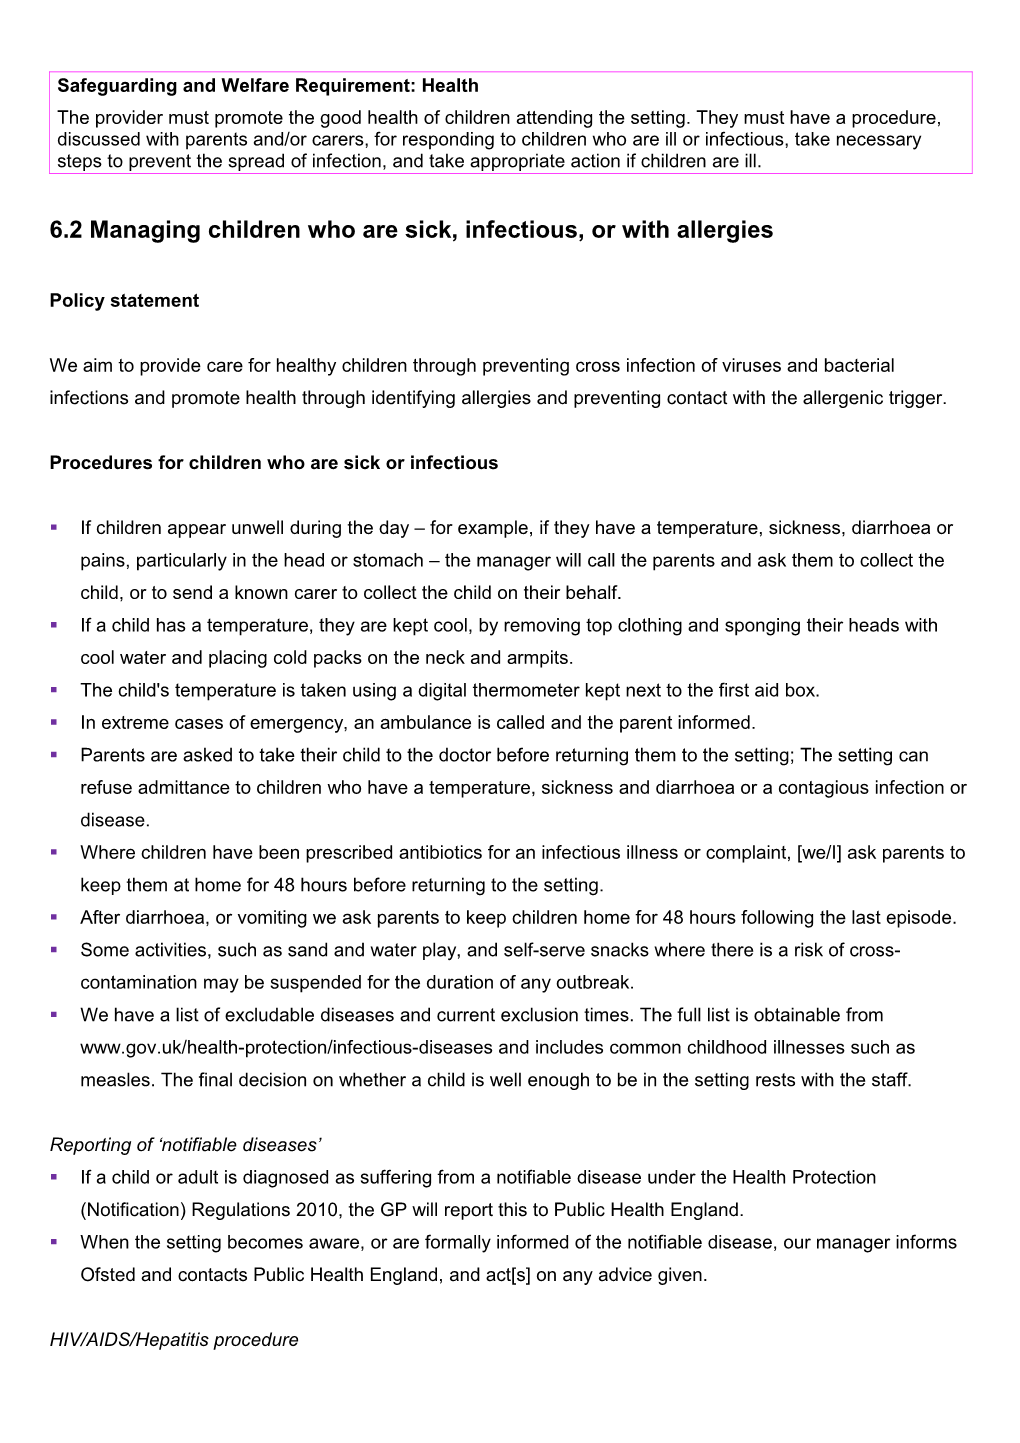 6.2 Managing Children Who Are Sick, Infectious, Or with Allergies s1